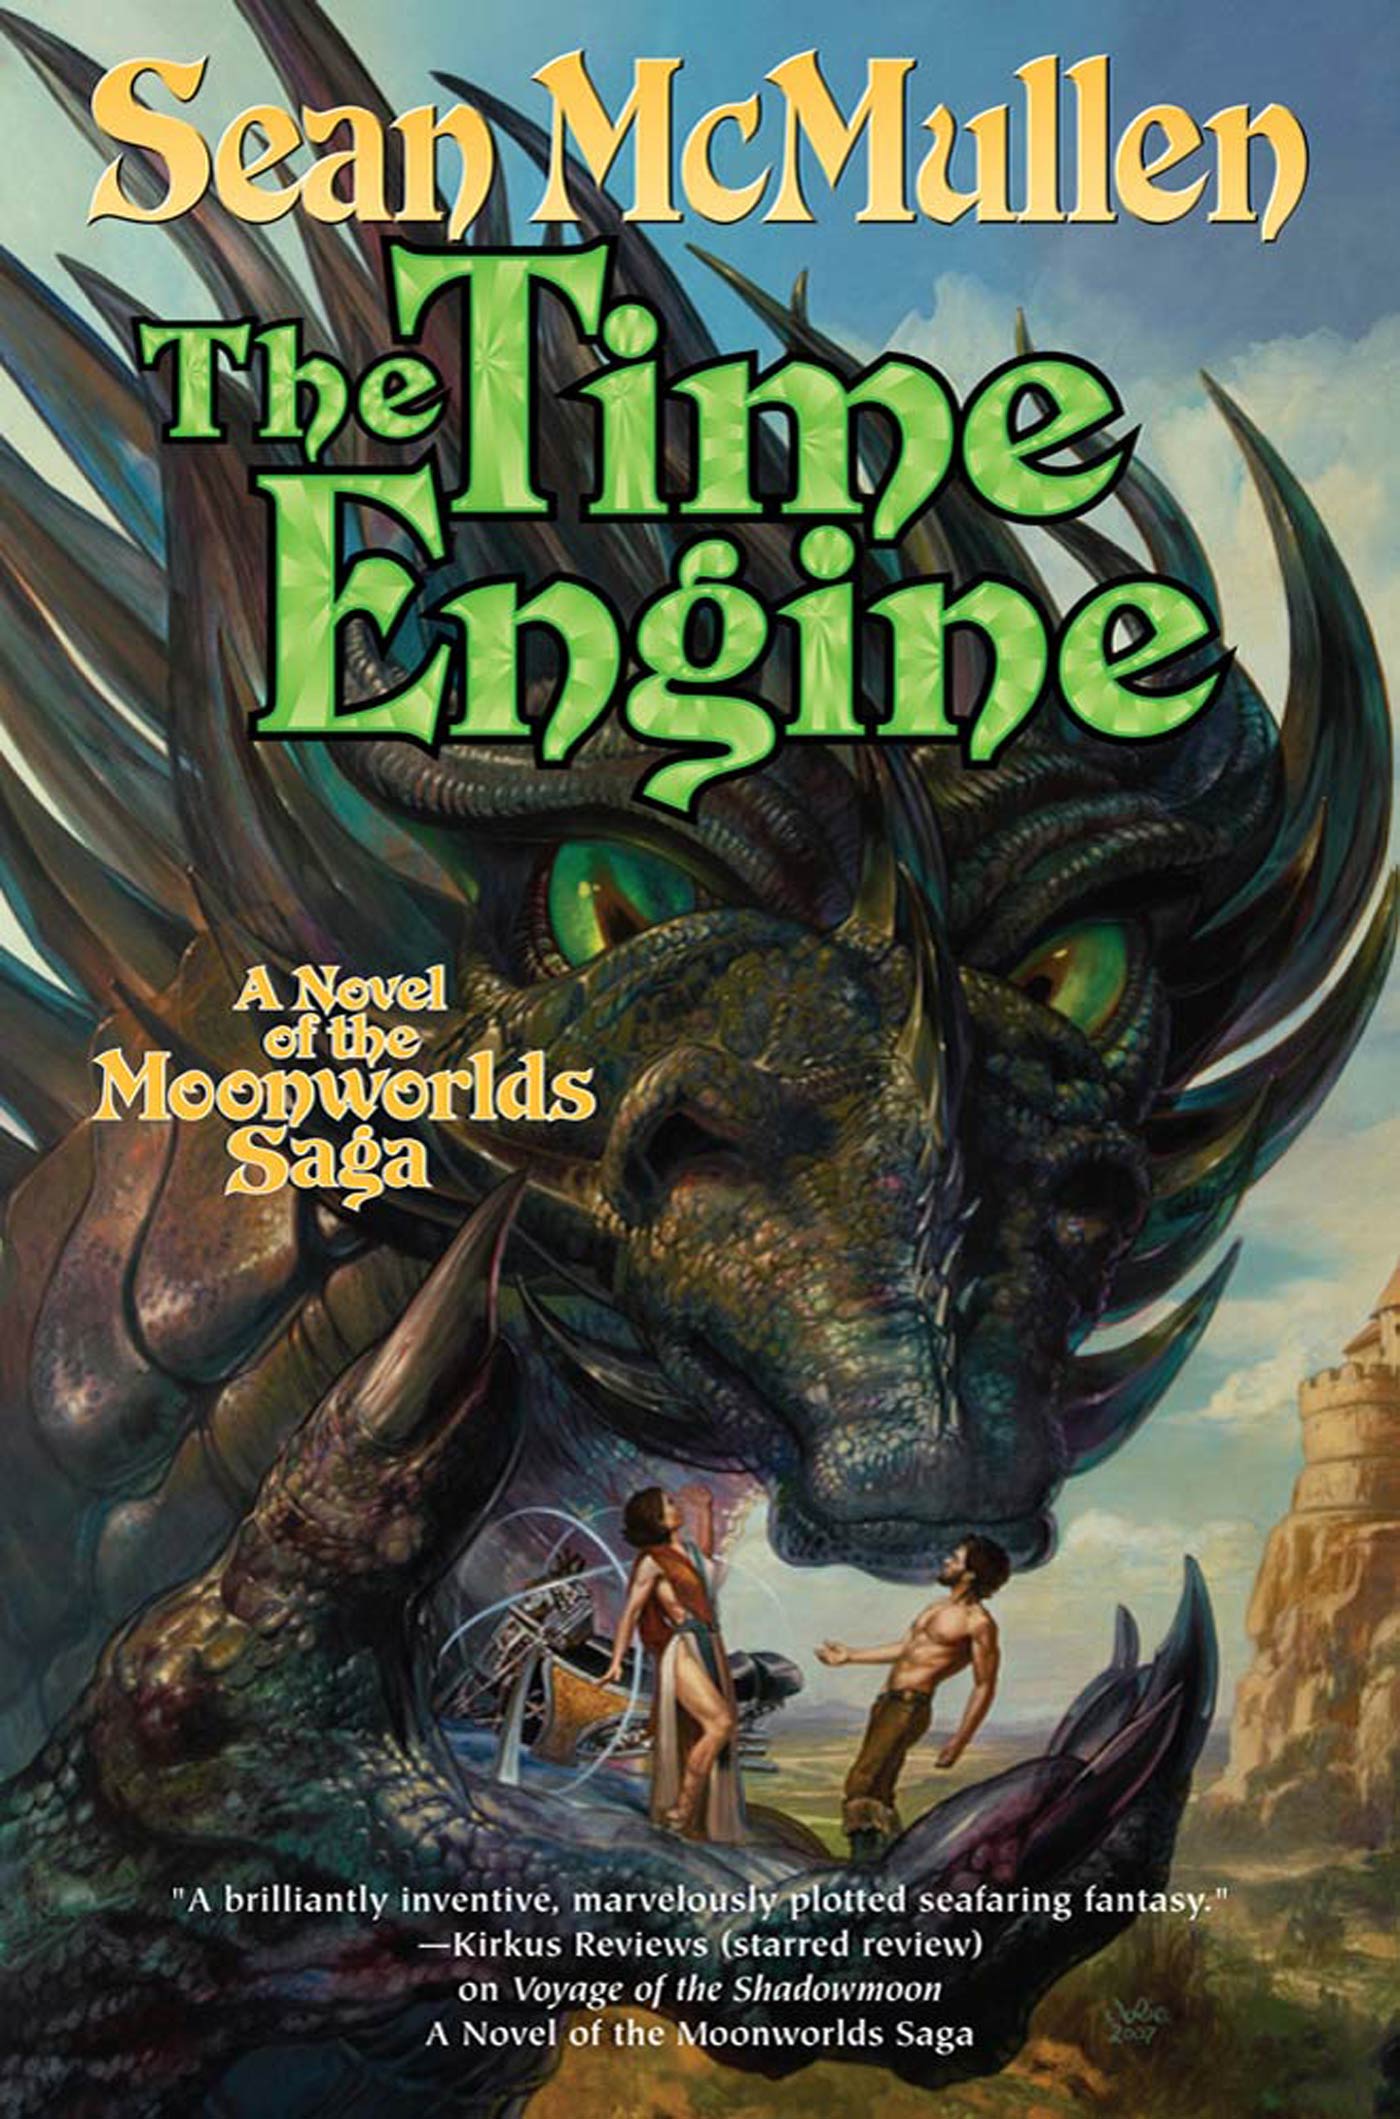 The Time Engine : The Fourth Book of the Moonworlds Saga by Sean Mcmullen